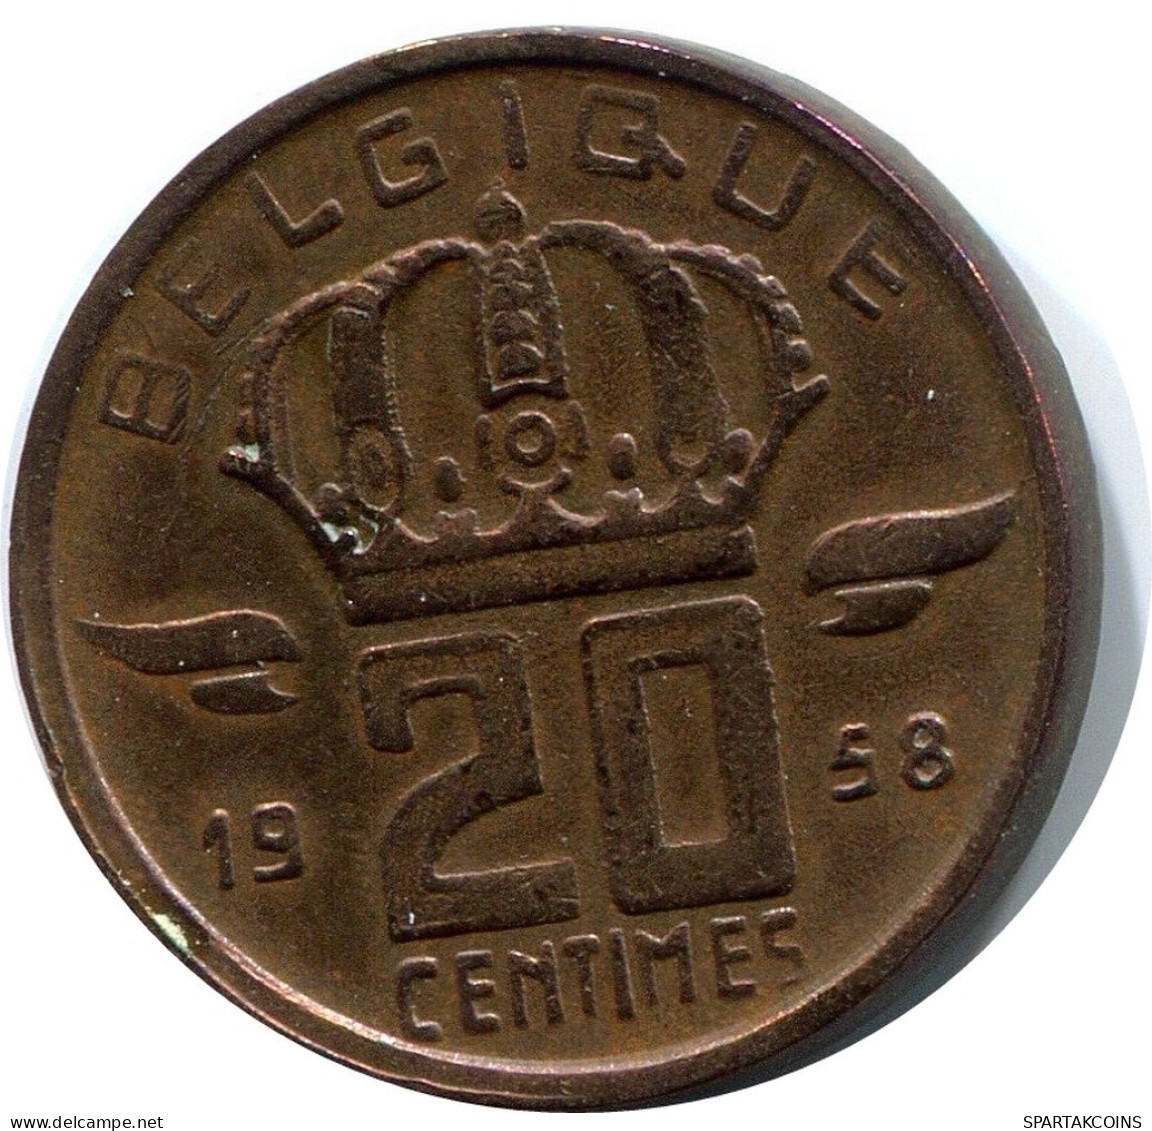 20 CENTIMES 1958 FRENCH Text BELGIUM Coin #BA398.U.A - 25 Cent